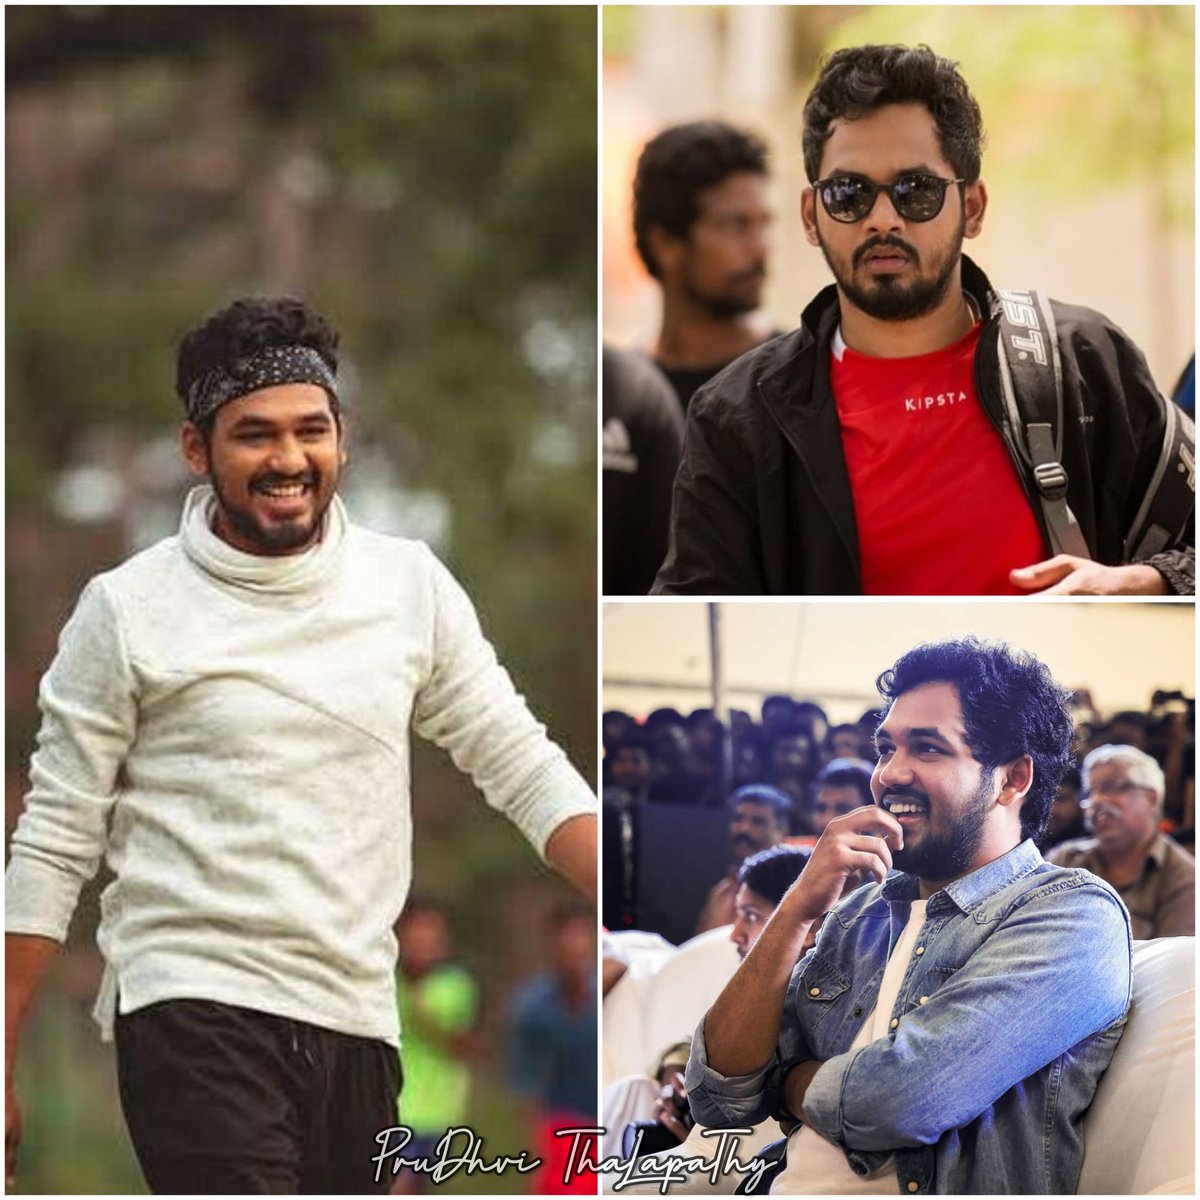 #HBDHiphopTamizha
A VerY HapPy BirThDay AnnA
Let This Year Brings YoU All Success , AmazinG & SurprisinG MomenTs
                    ❤️❤️❤️
@hiphoptamizha @hiphoptamizhaa_
#HBDHiphoptamizha
#HappyBirthdayHHT
#HBDHiphopAdhi